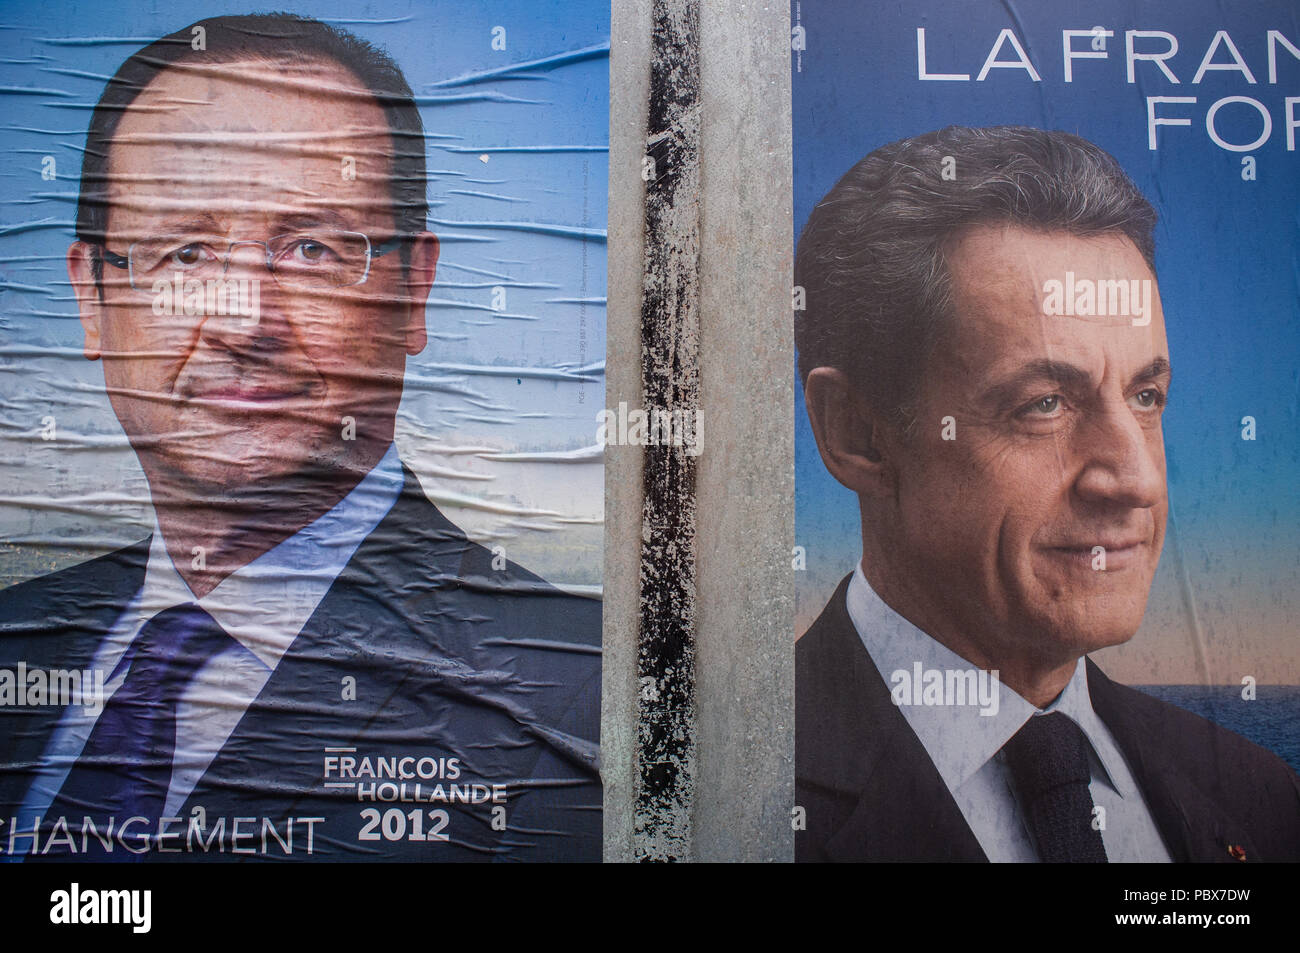 Torn French election poster for Nicolas Sarkozy and Francois Hollande, 'La France Forte', 'Changement', 2012 Stock Photo